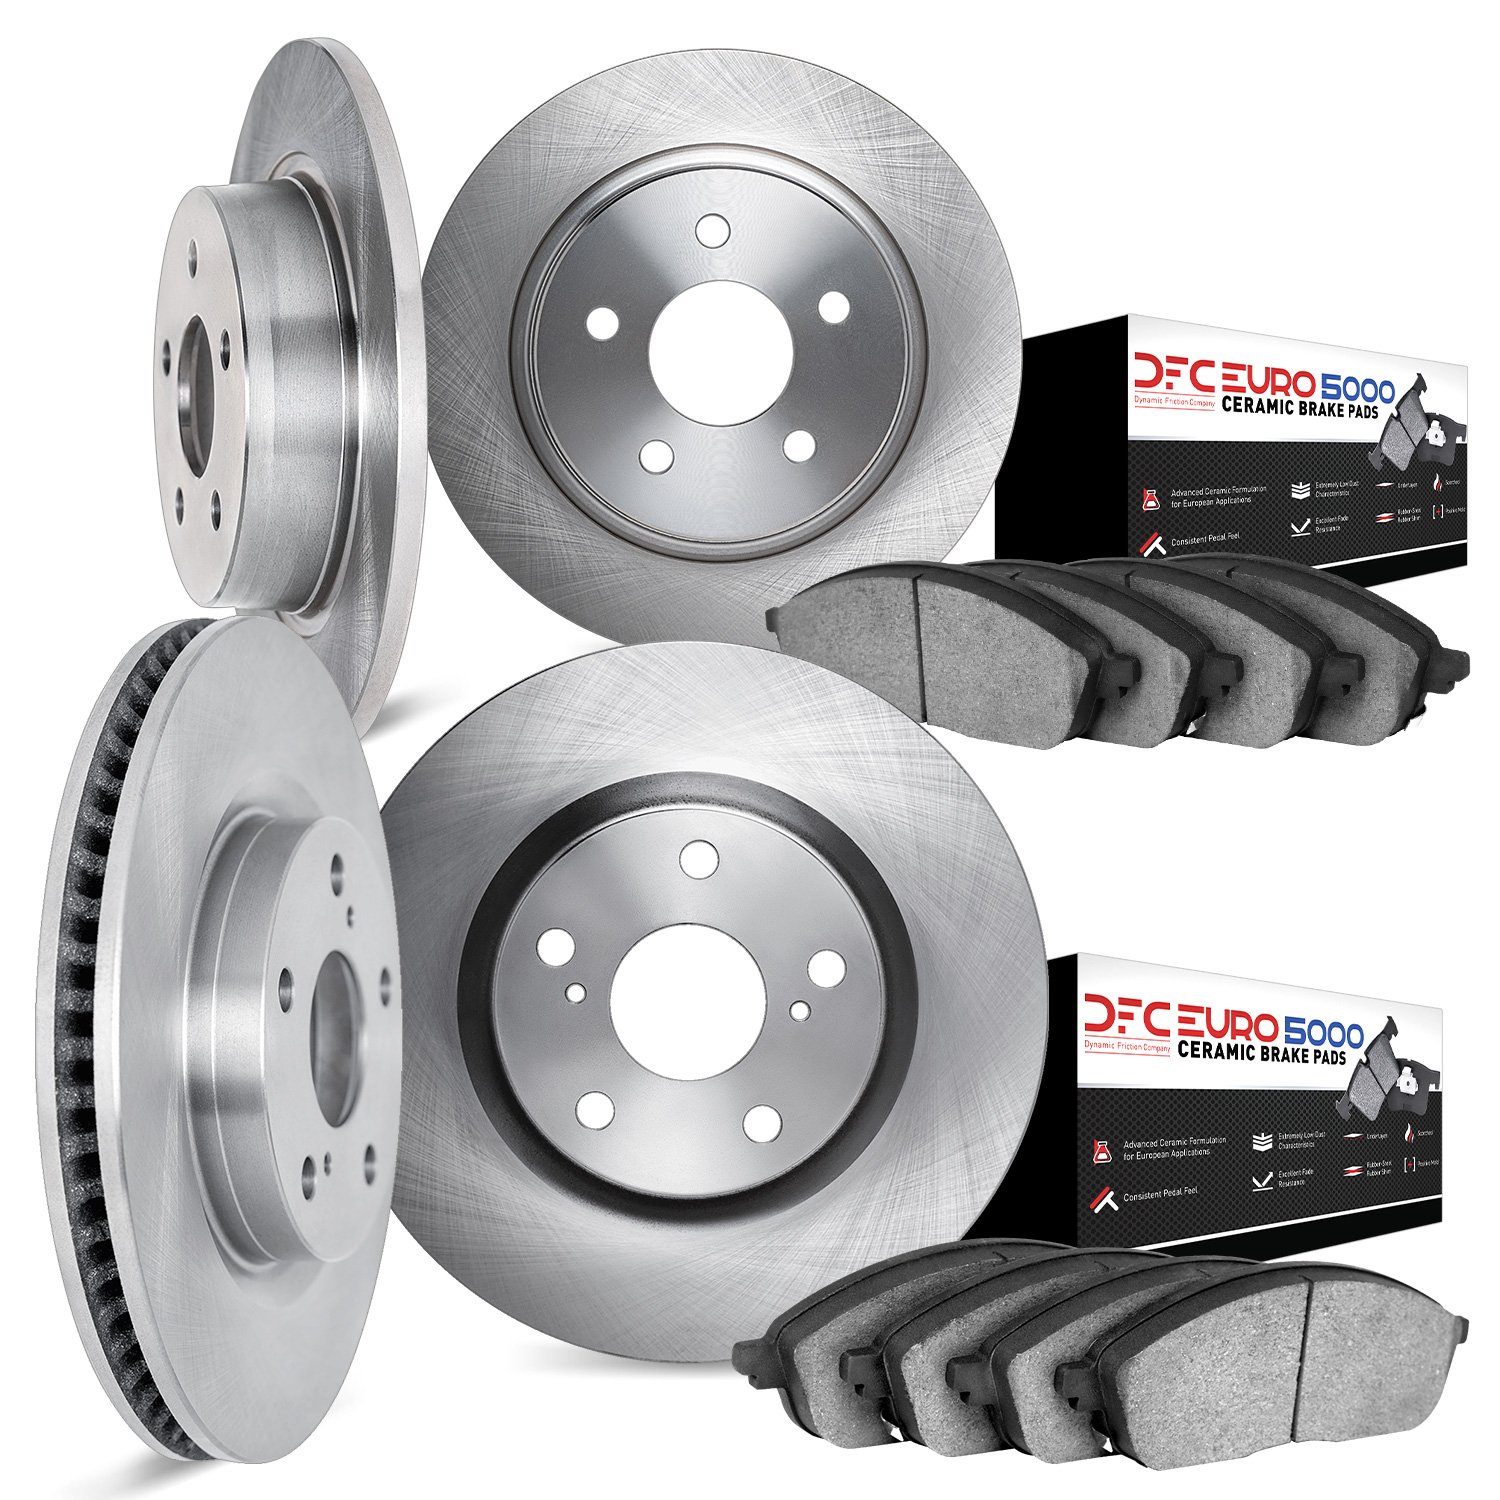 6604-63033 Brake Rotors w/5000 Euro Ceramic Brake Pads, 1998-2005 Mercedes-Benz, Position: Front and Rear